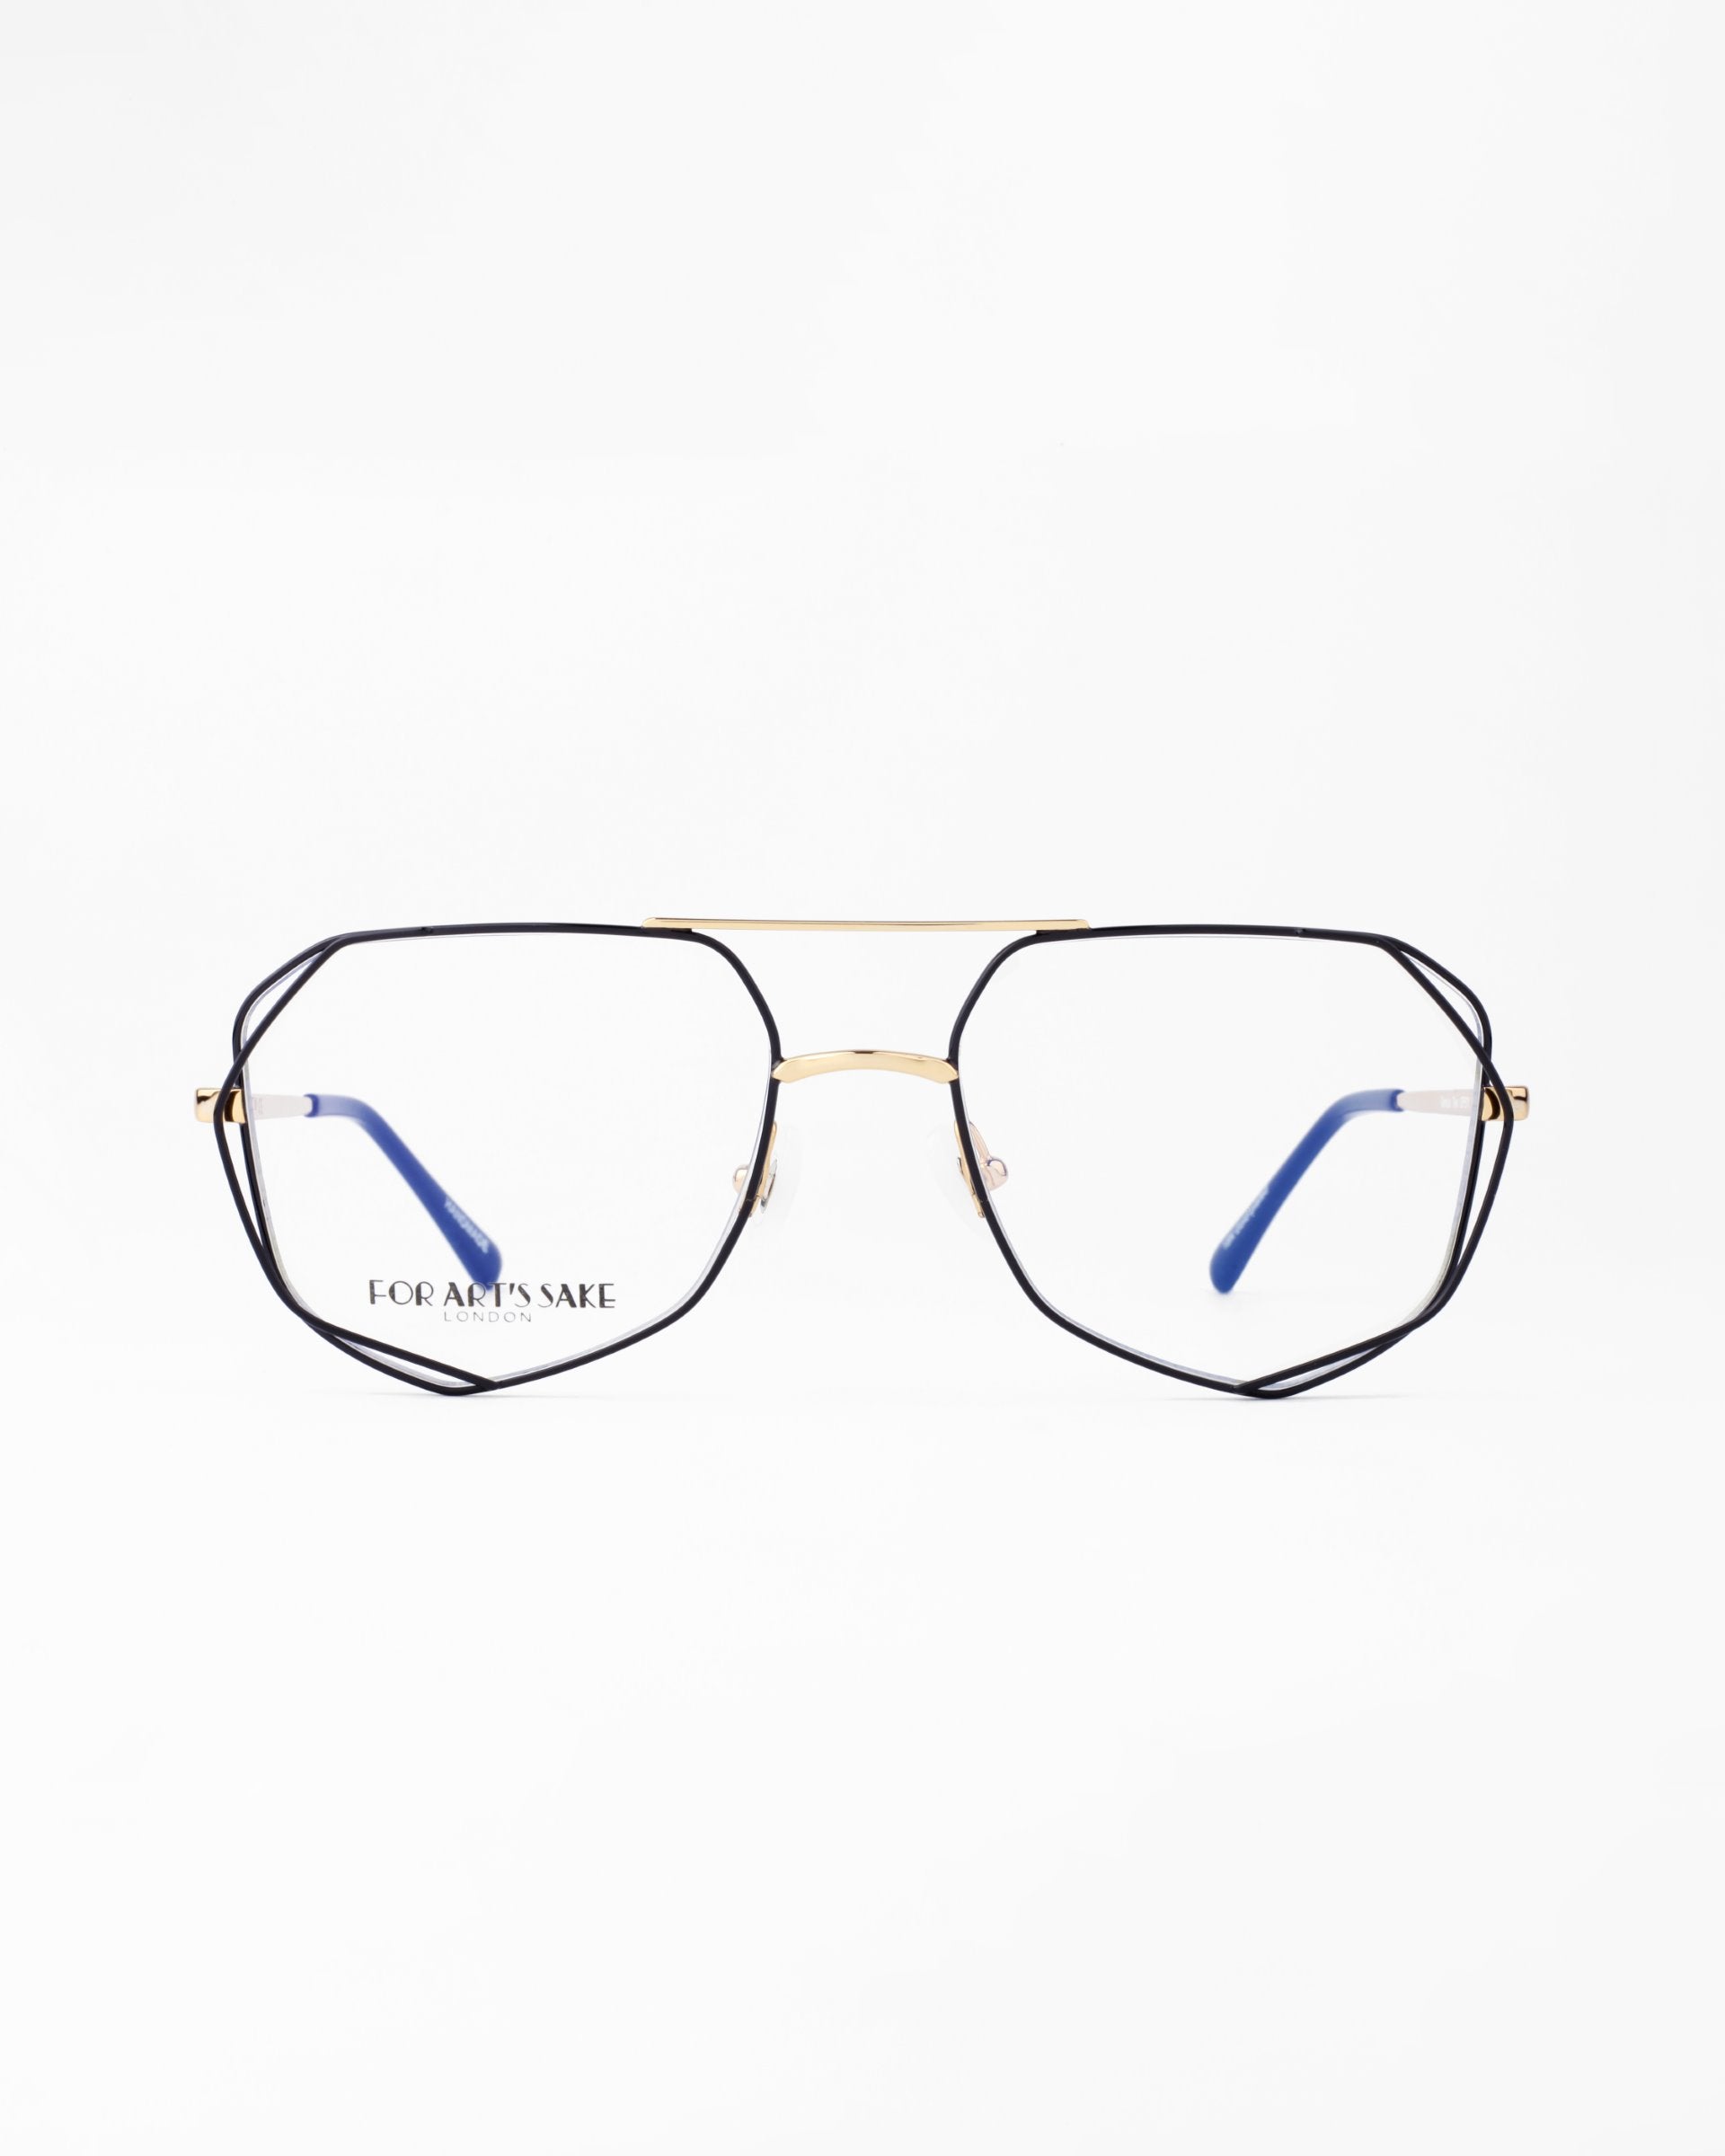 A pair of eyeglasses with hexagonal black frames, gold bridge, and blue-tipped temples is centered against a white background. The brand name "For Art's Sake®" is visible on the left lens. Featuring a Blue Light Filter, the Genius Two glasses are perfect for digital screen use.